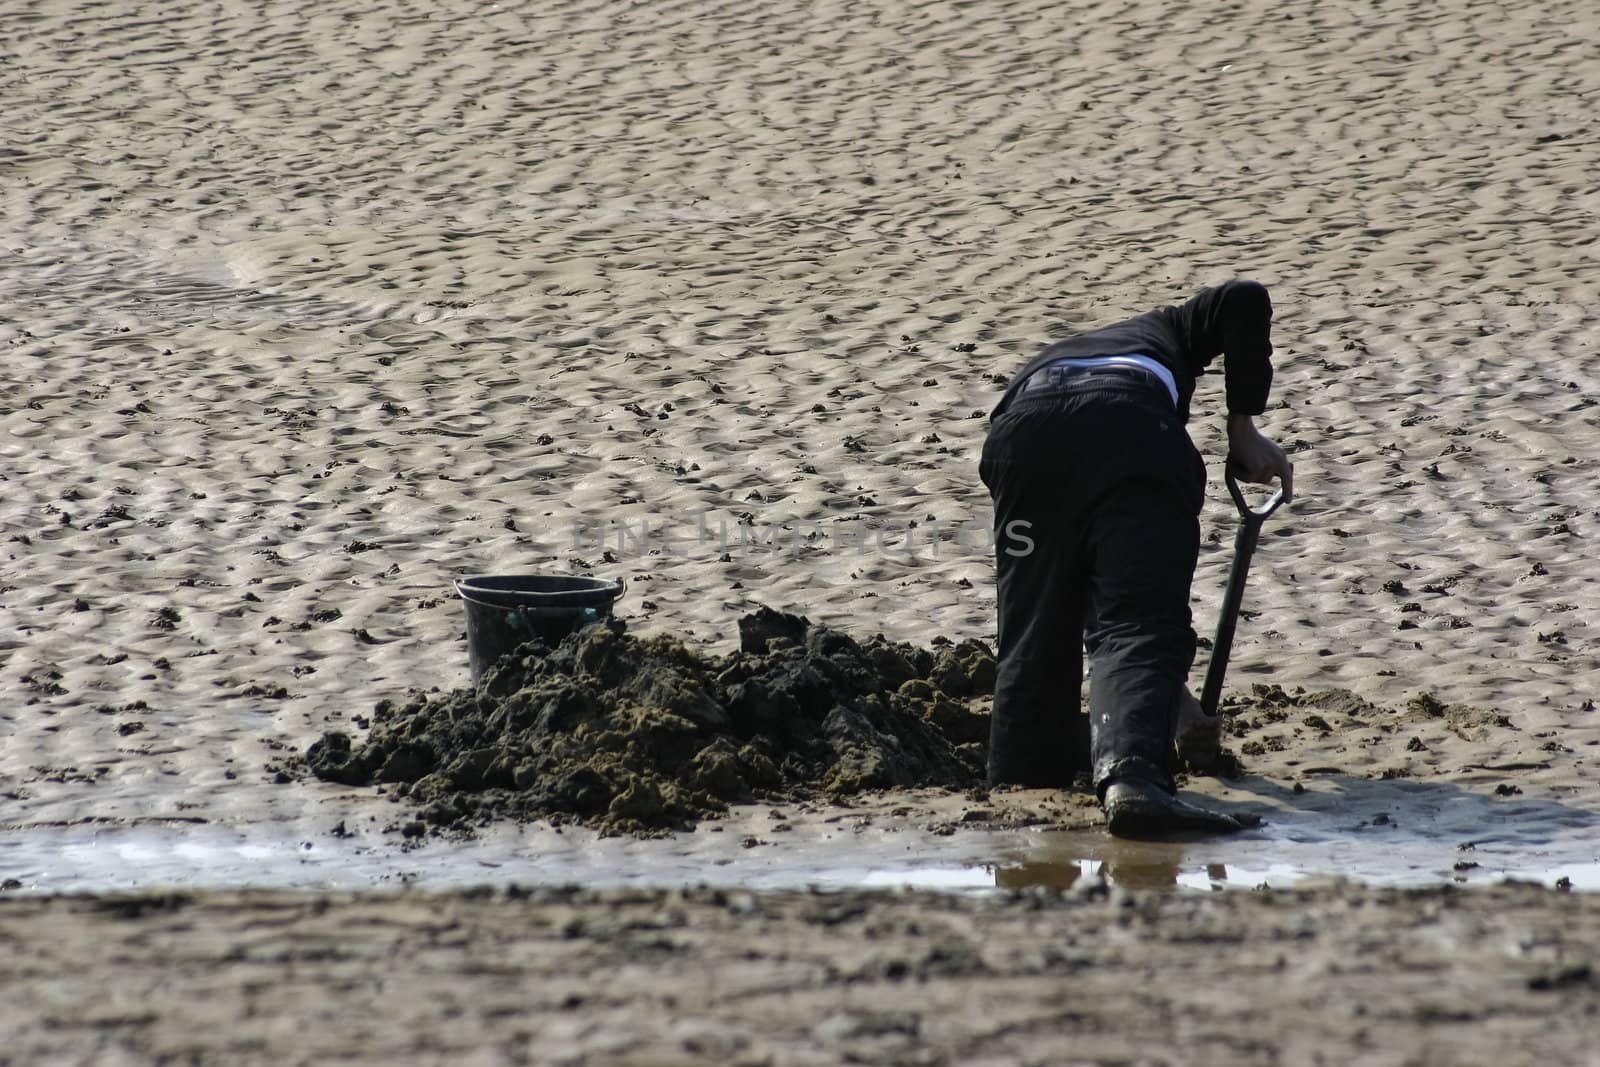 man digging for worms in the sand to use as bait